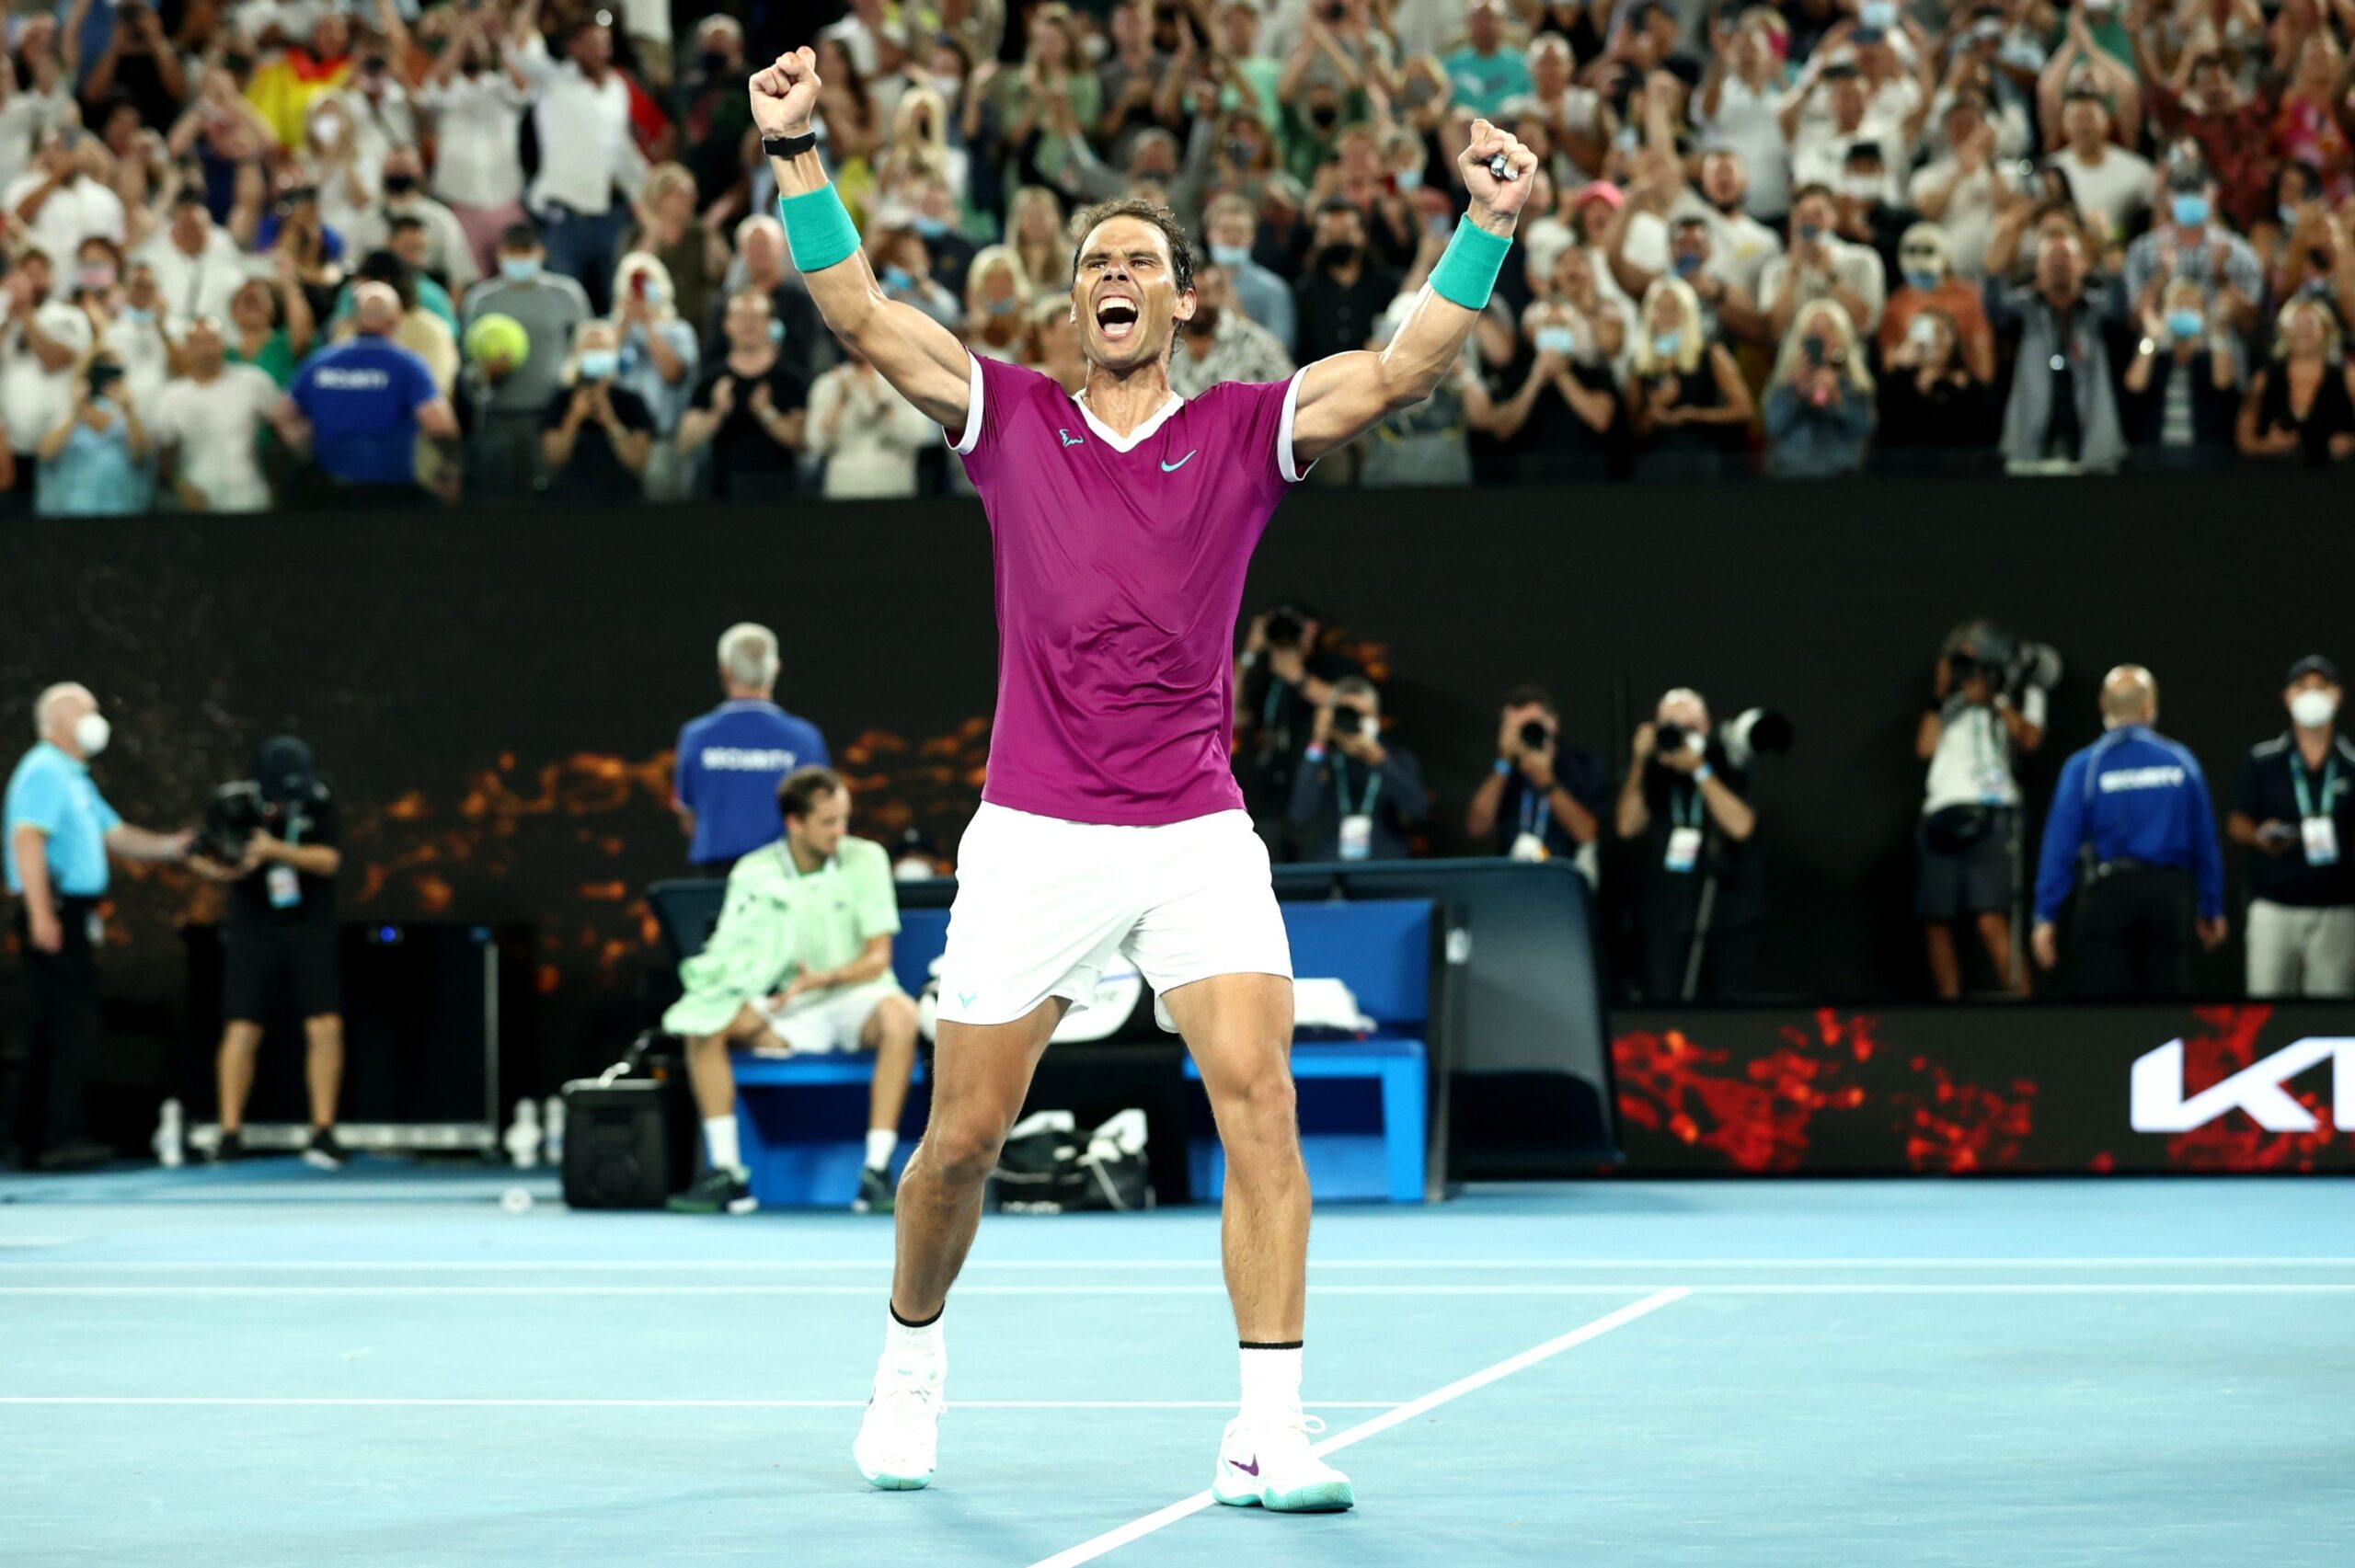 Defeating Daniil Medvedev Rafael Nadal becomes the first man to win 21 Grand Slam titles.